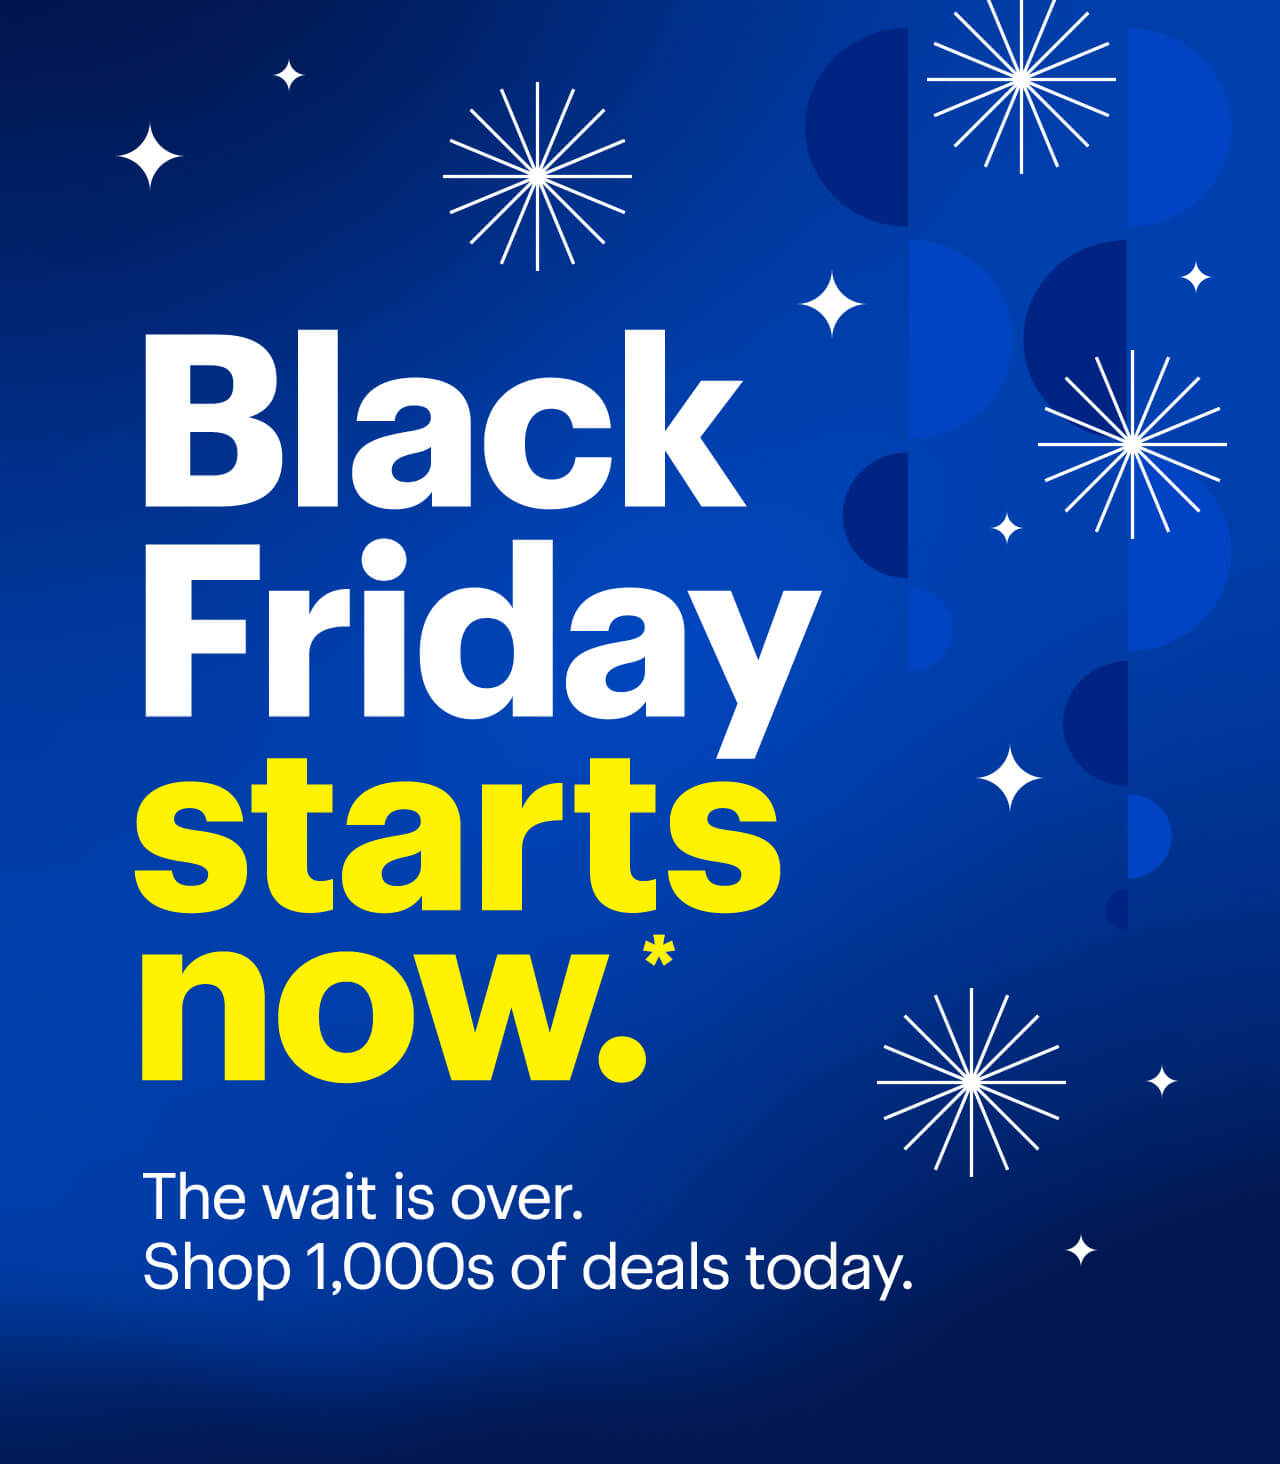 Black Friday starts now. The wait is over. Shop 1,000s of deals today. Reference disclaimer.